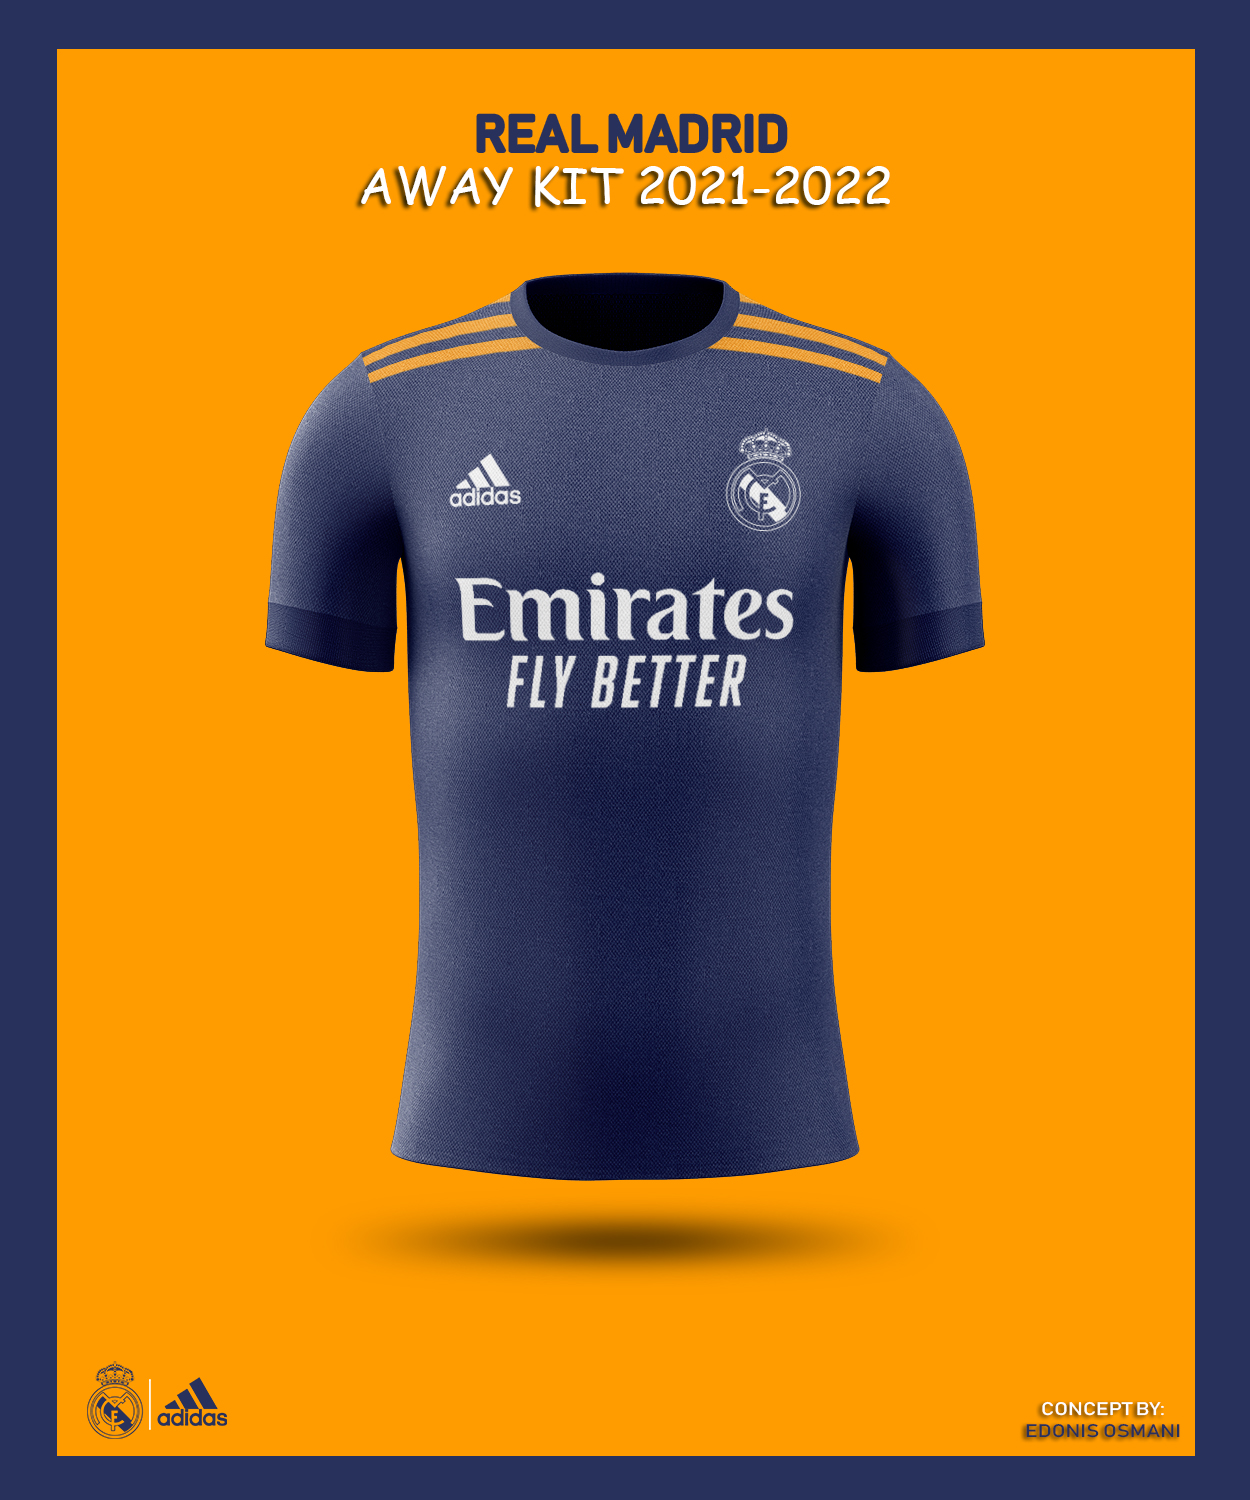 REAL MADRID AWAY Kit concept 2021-2022